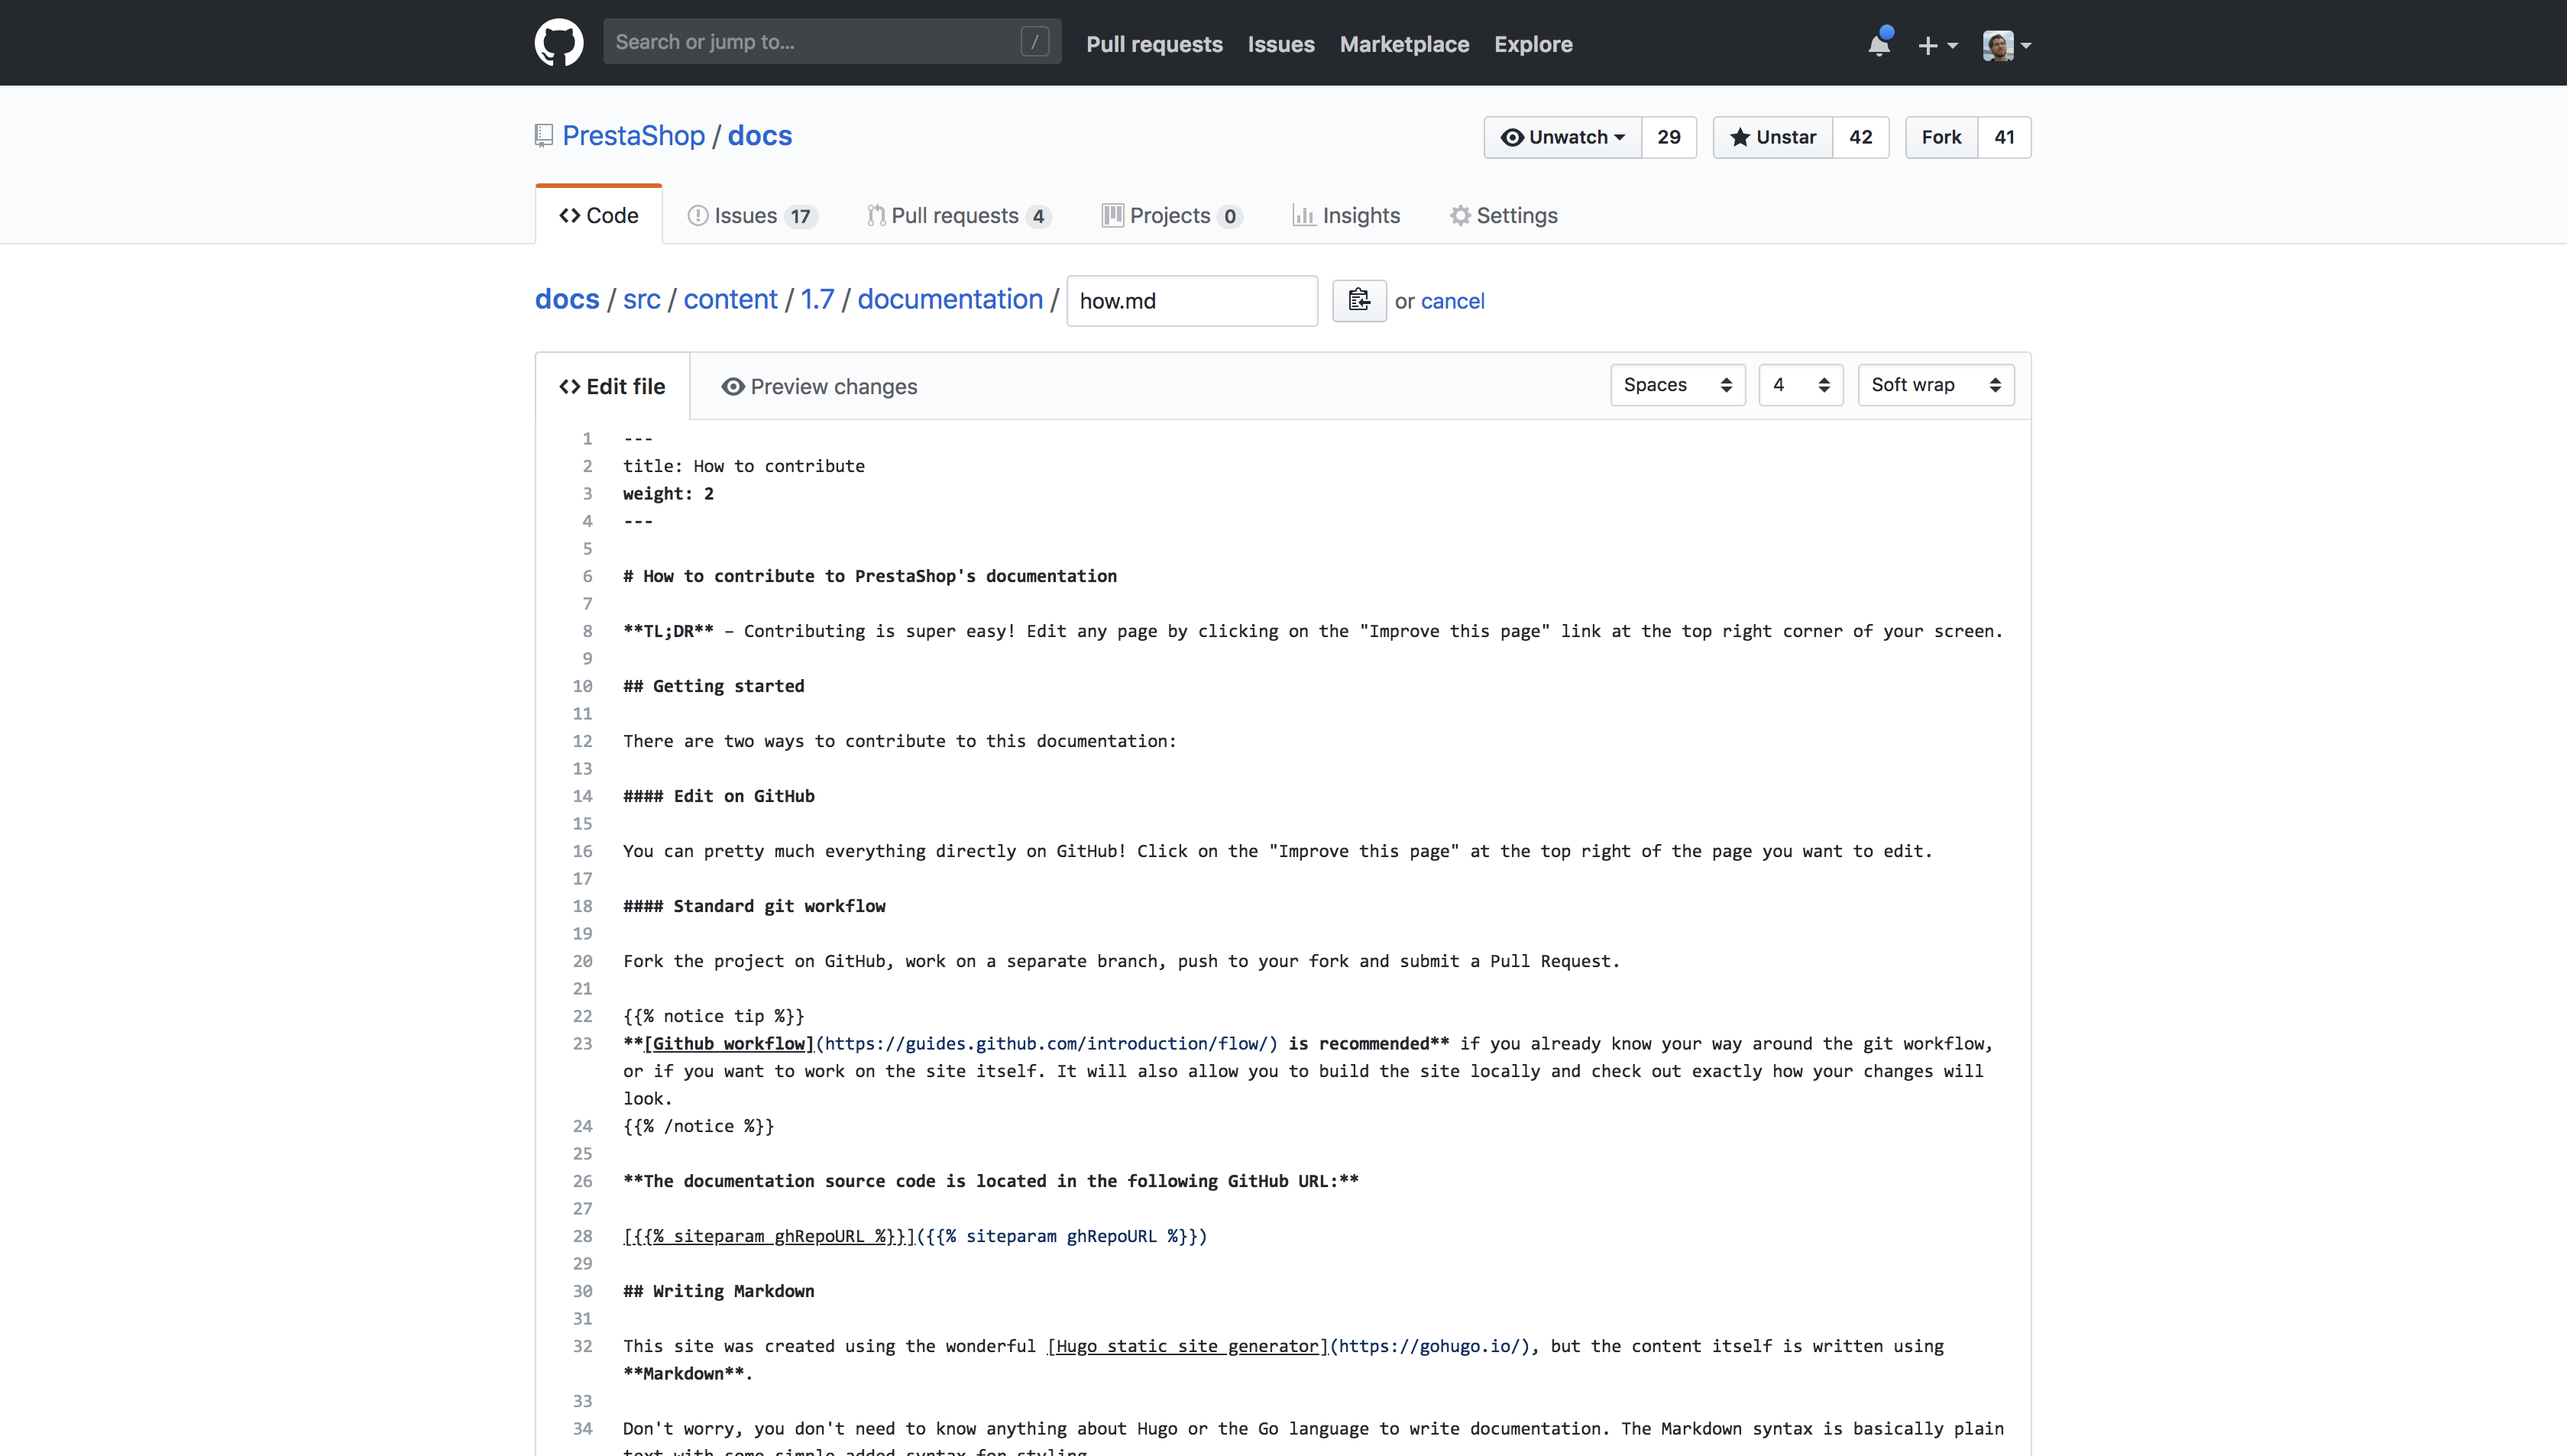 Capture of the edit page on GitHub